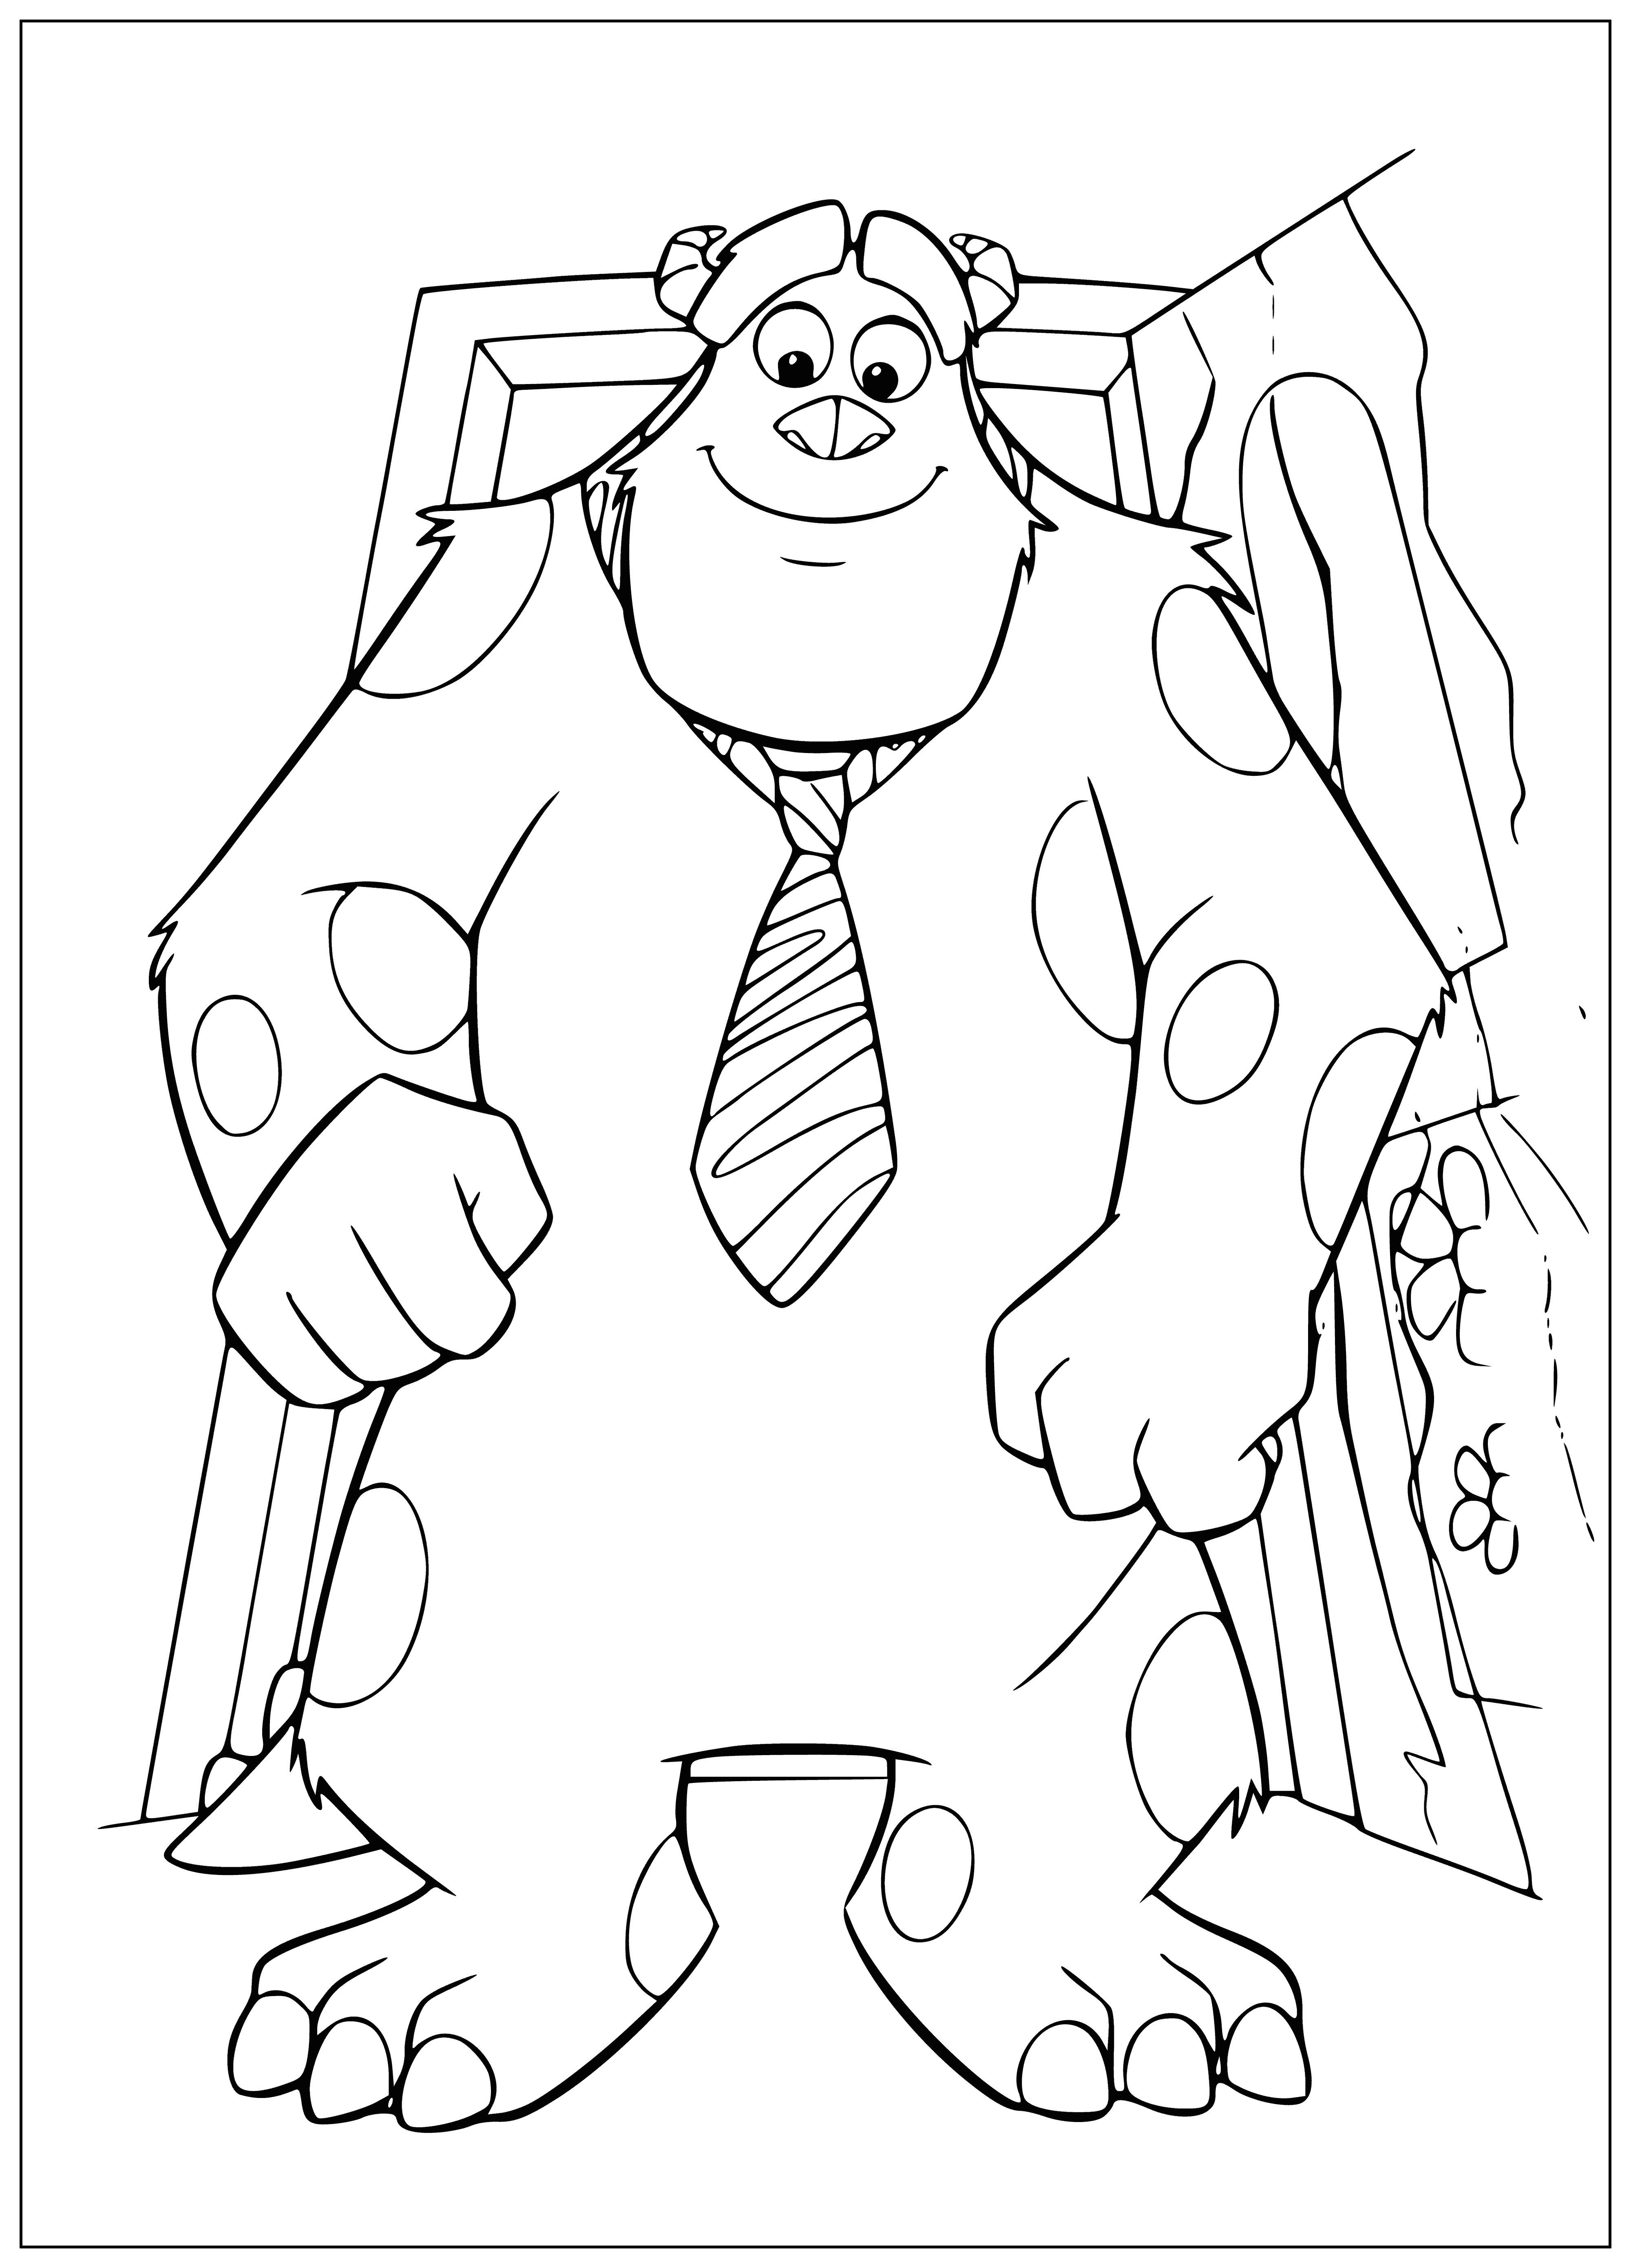 Sally in a tie coloring page